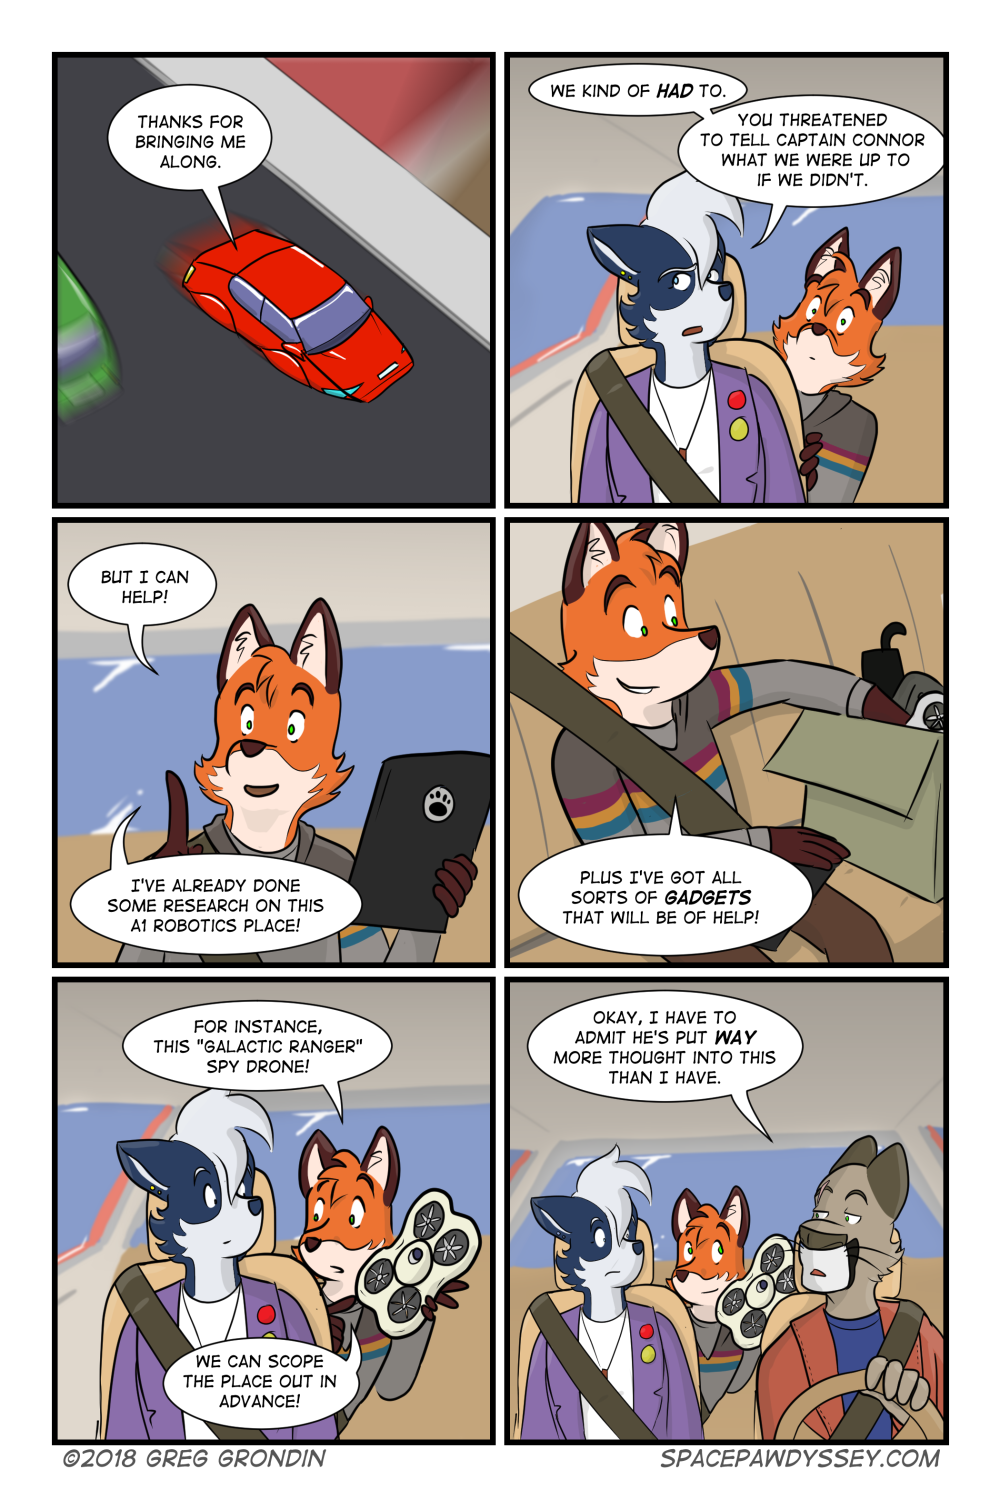 Space Pawdyssey #165